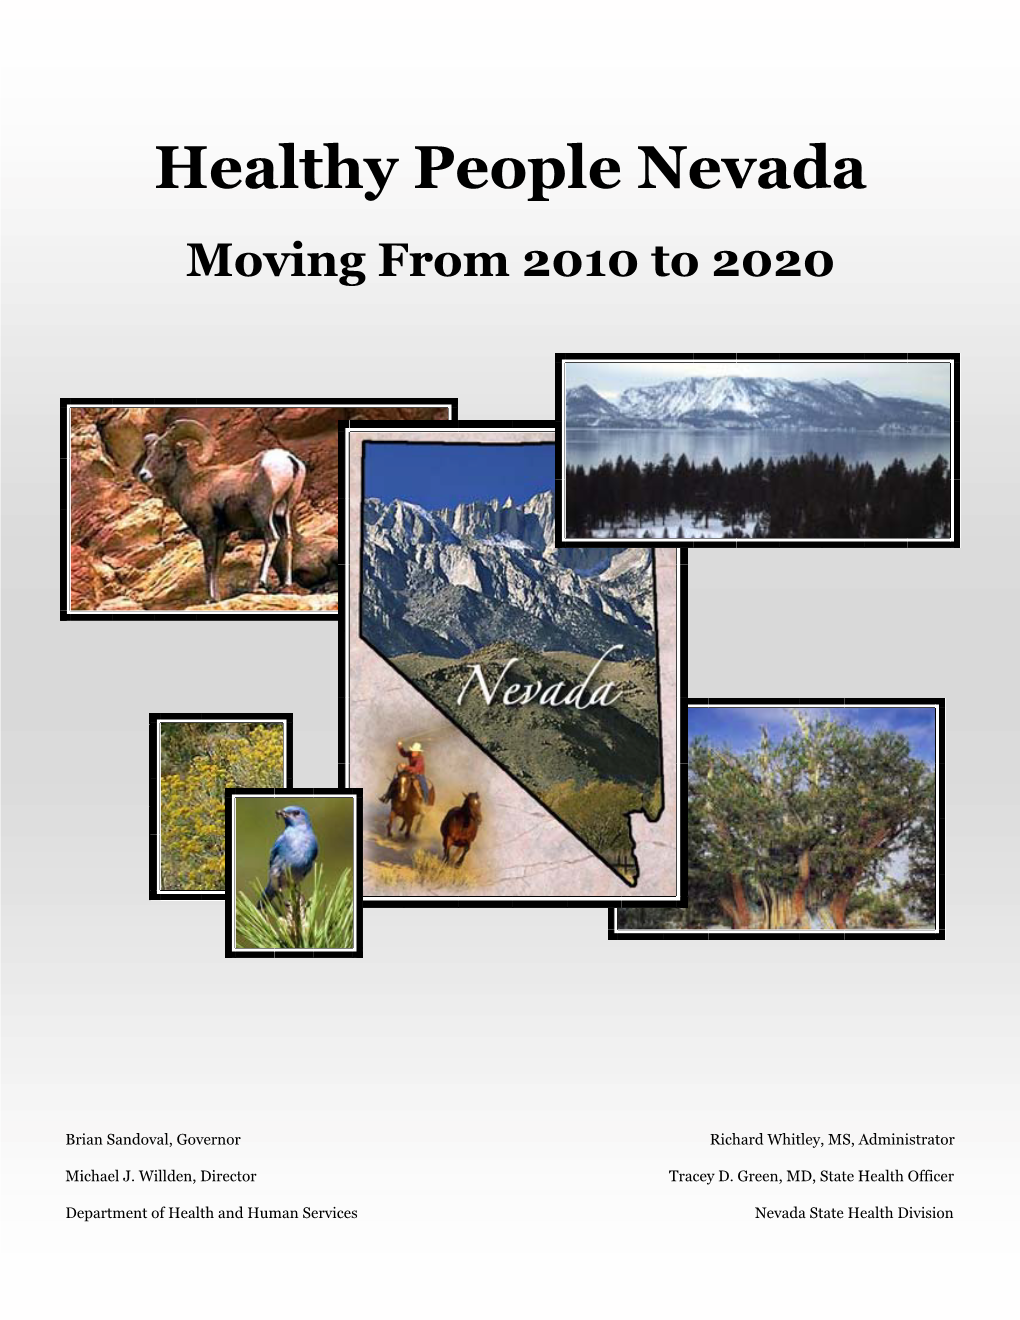 Healthy People Nevada Moving from 2010 to 2020